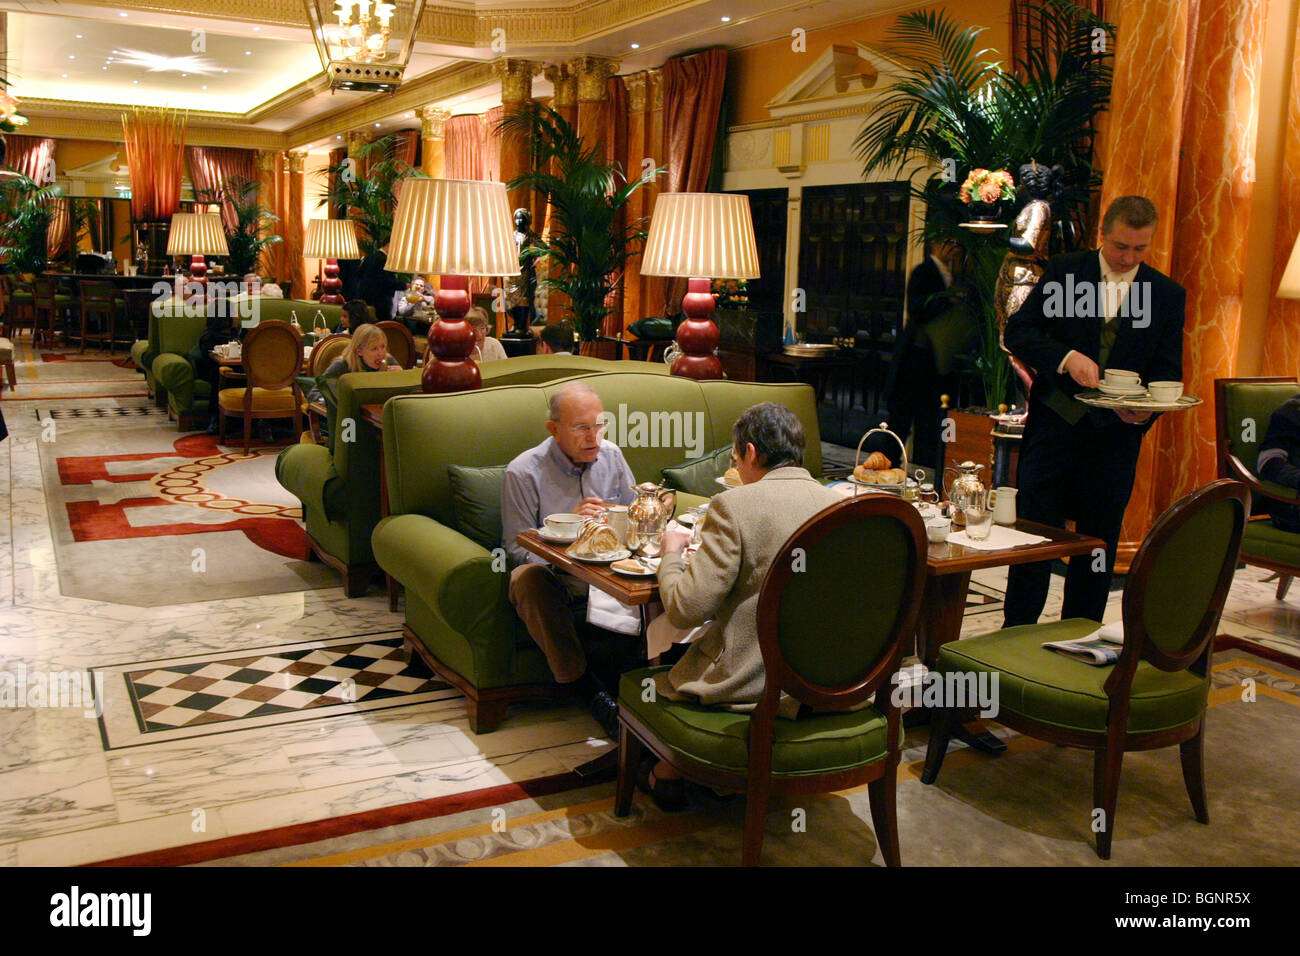 The Dorchester Hotel London interior; A waiter serving breakfast to hotel guests at the Dorchester Hotel, Park Lane, London UK Stock Photo